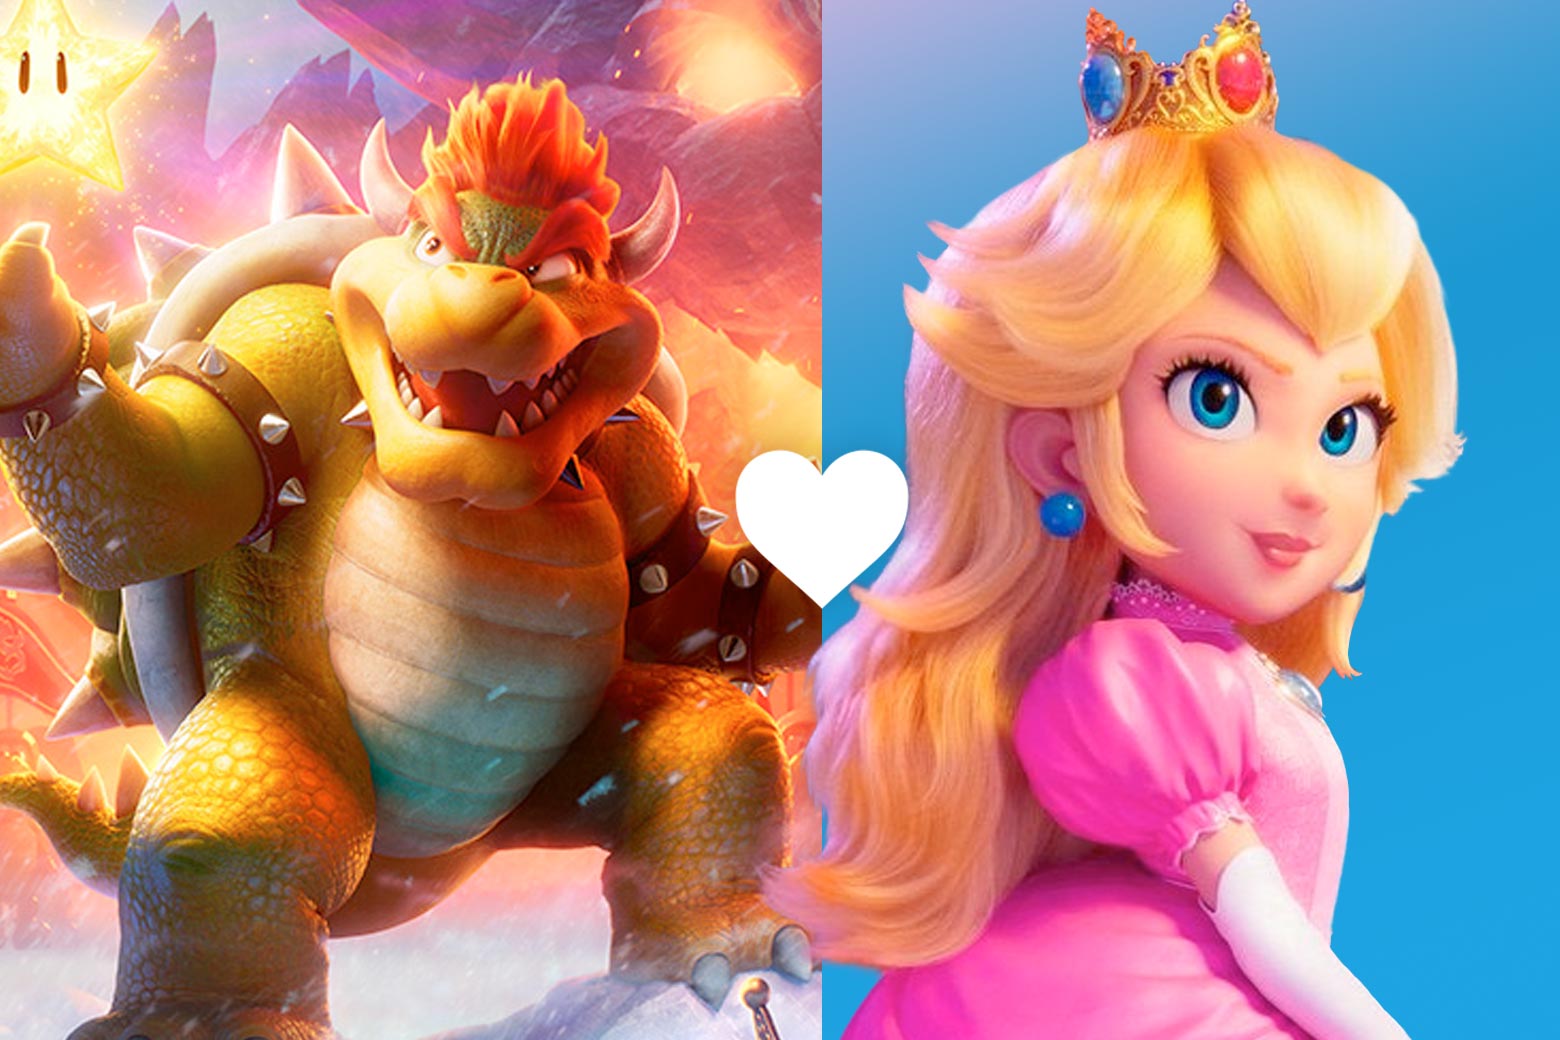 The character Bowser and the character Peach, from the Super Mario movie. 